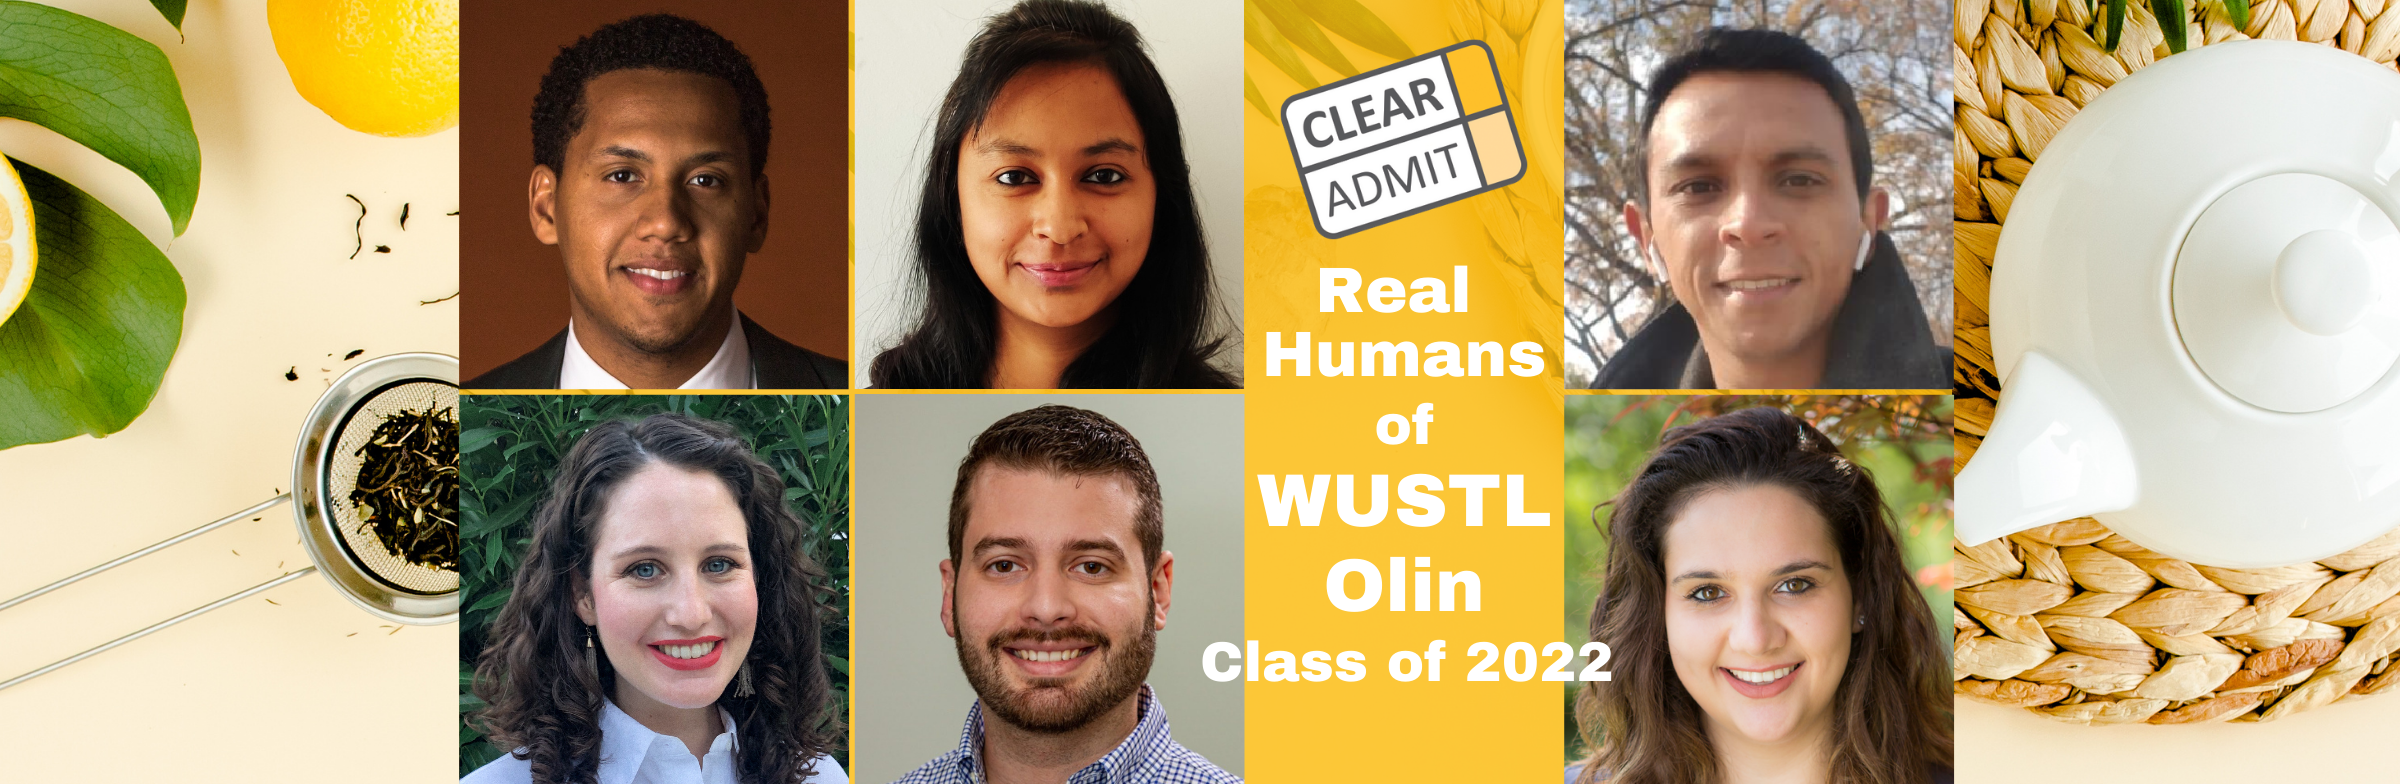 Image for Real Humans of Washington University Olin’s MBA Class of 2022